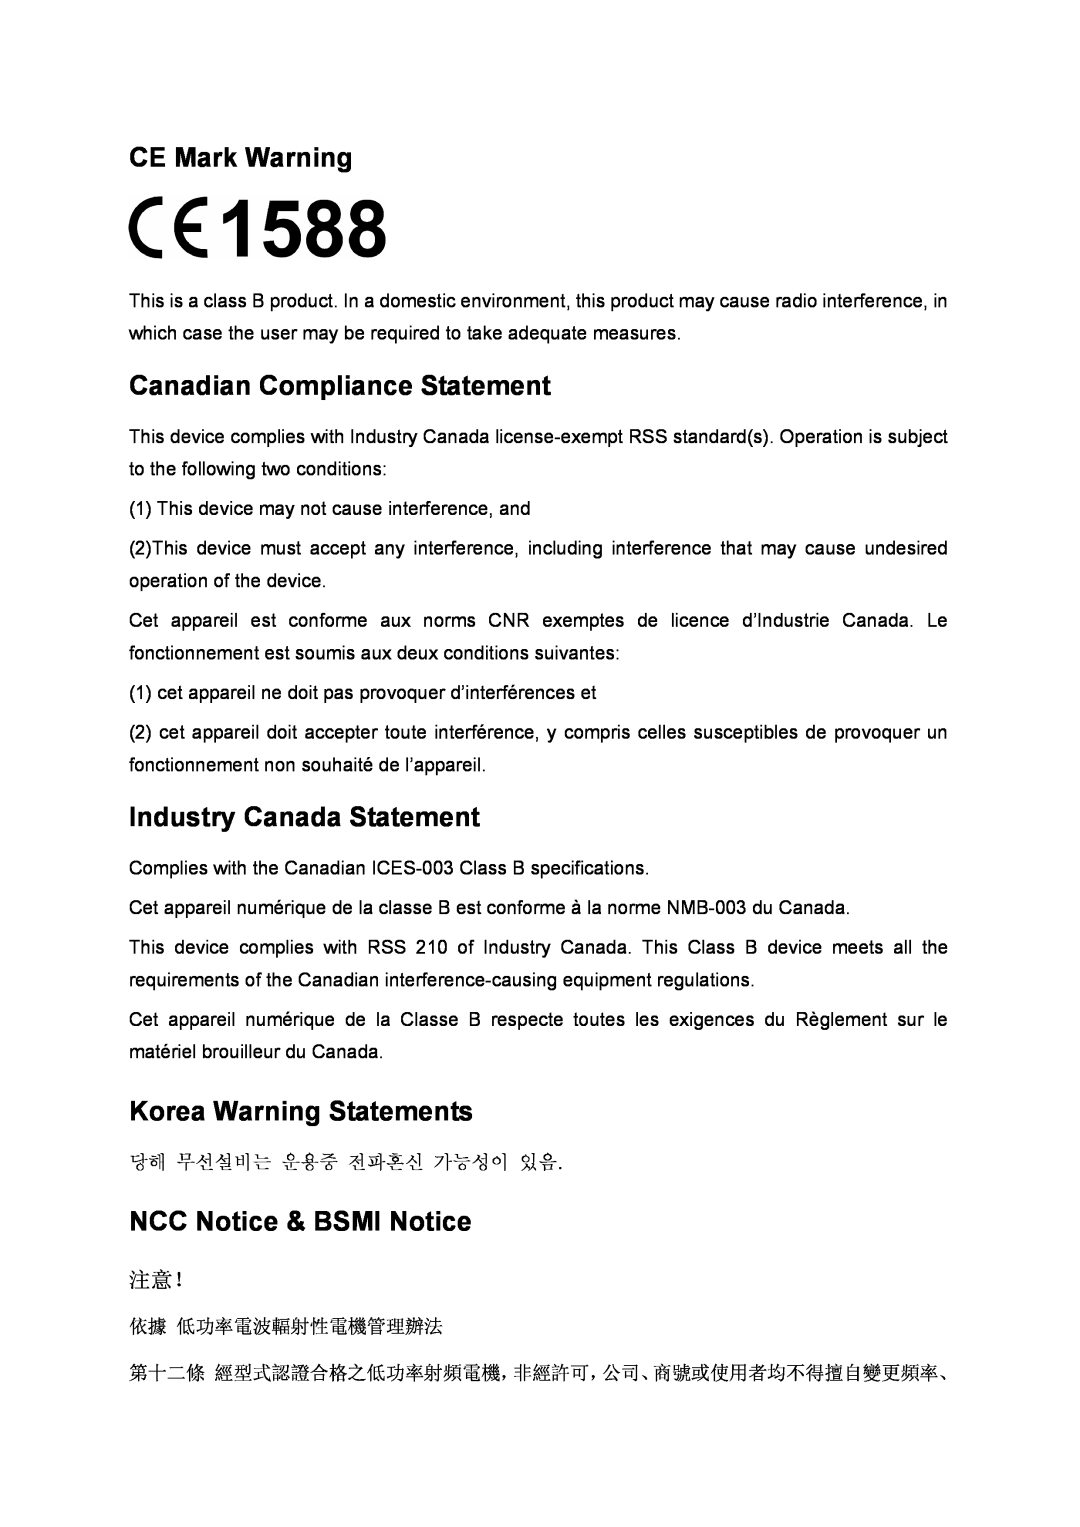 TP-Link TL-WR840N CE Mark Warning, Canadian Compliance Statement, Industry Canada Statement, Korea Warning Statements 